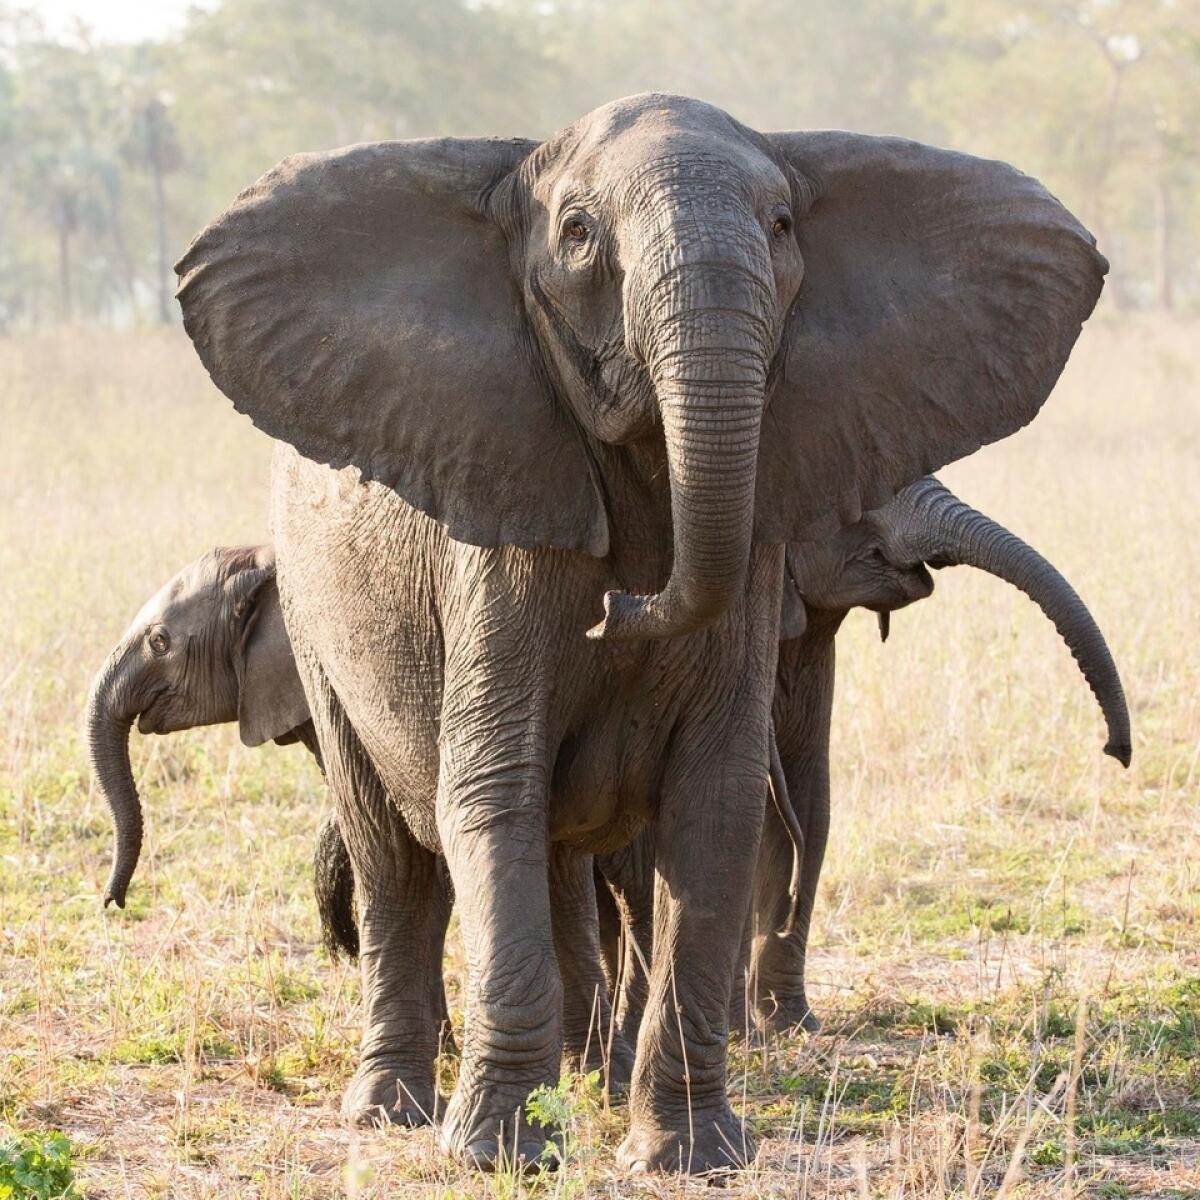 Tuskless elephant matriarch with her two calves in the Gorongosa National Park in Mozambique.